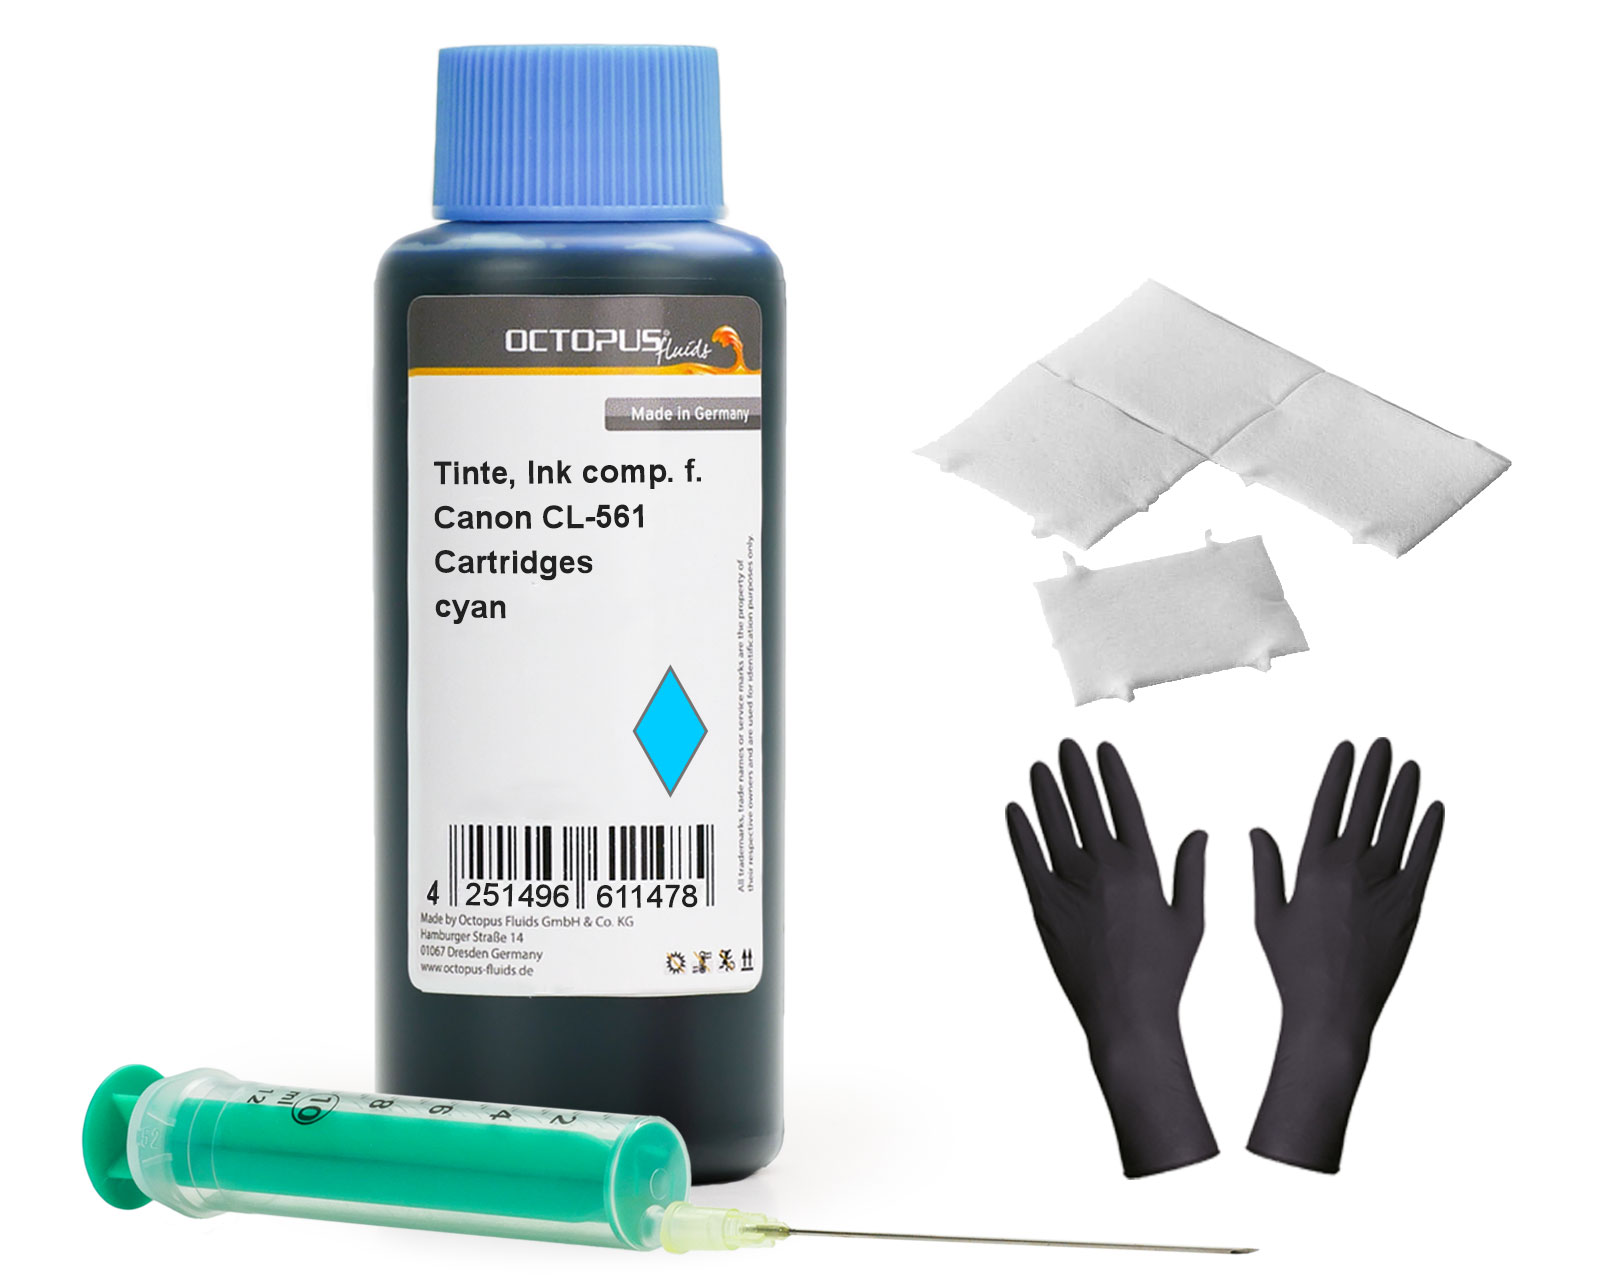 
Refill ink for Canon CL-561 ink cartridges, Canon Pixma TS 5300, 7400 cyan with syringe